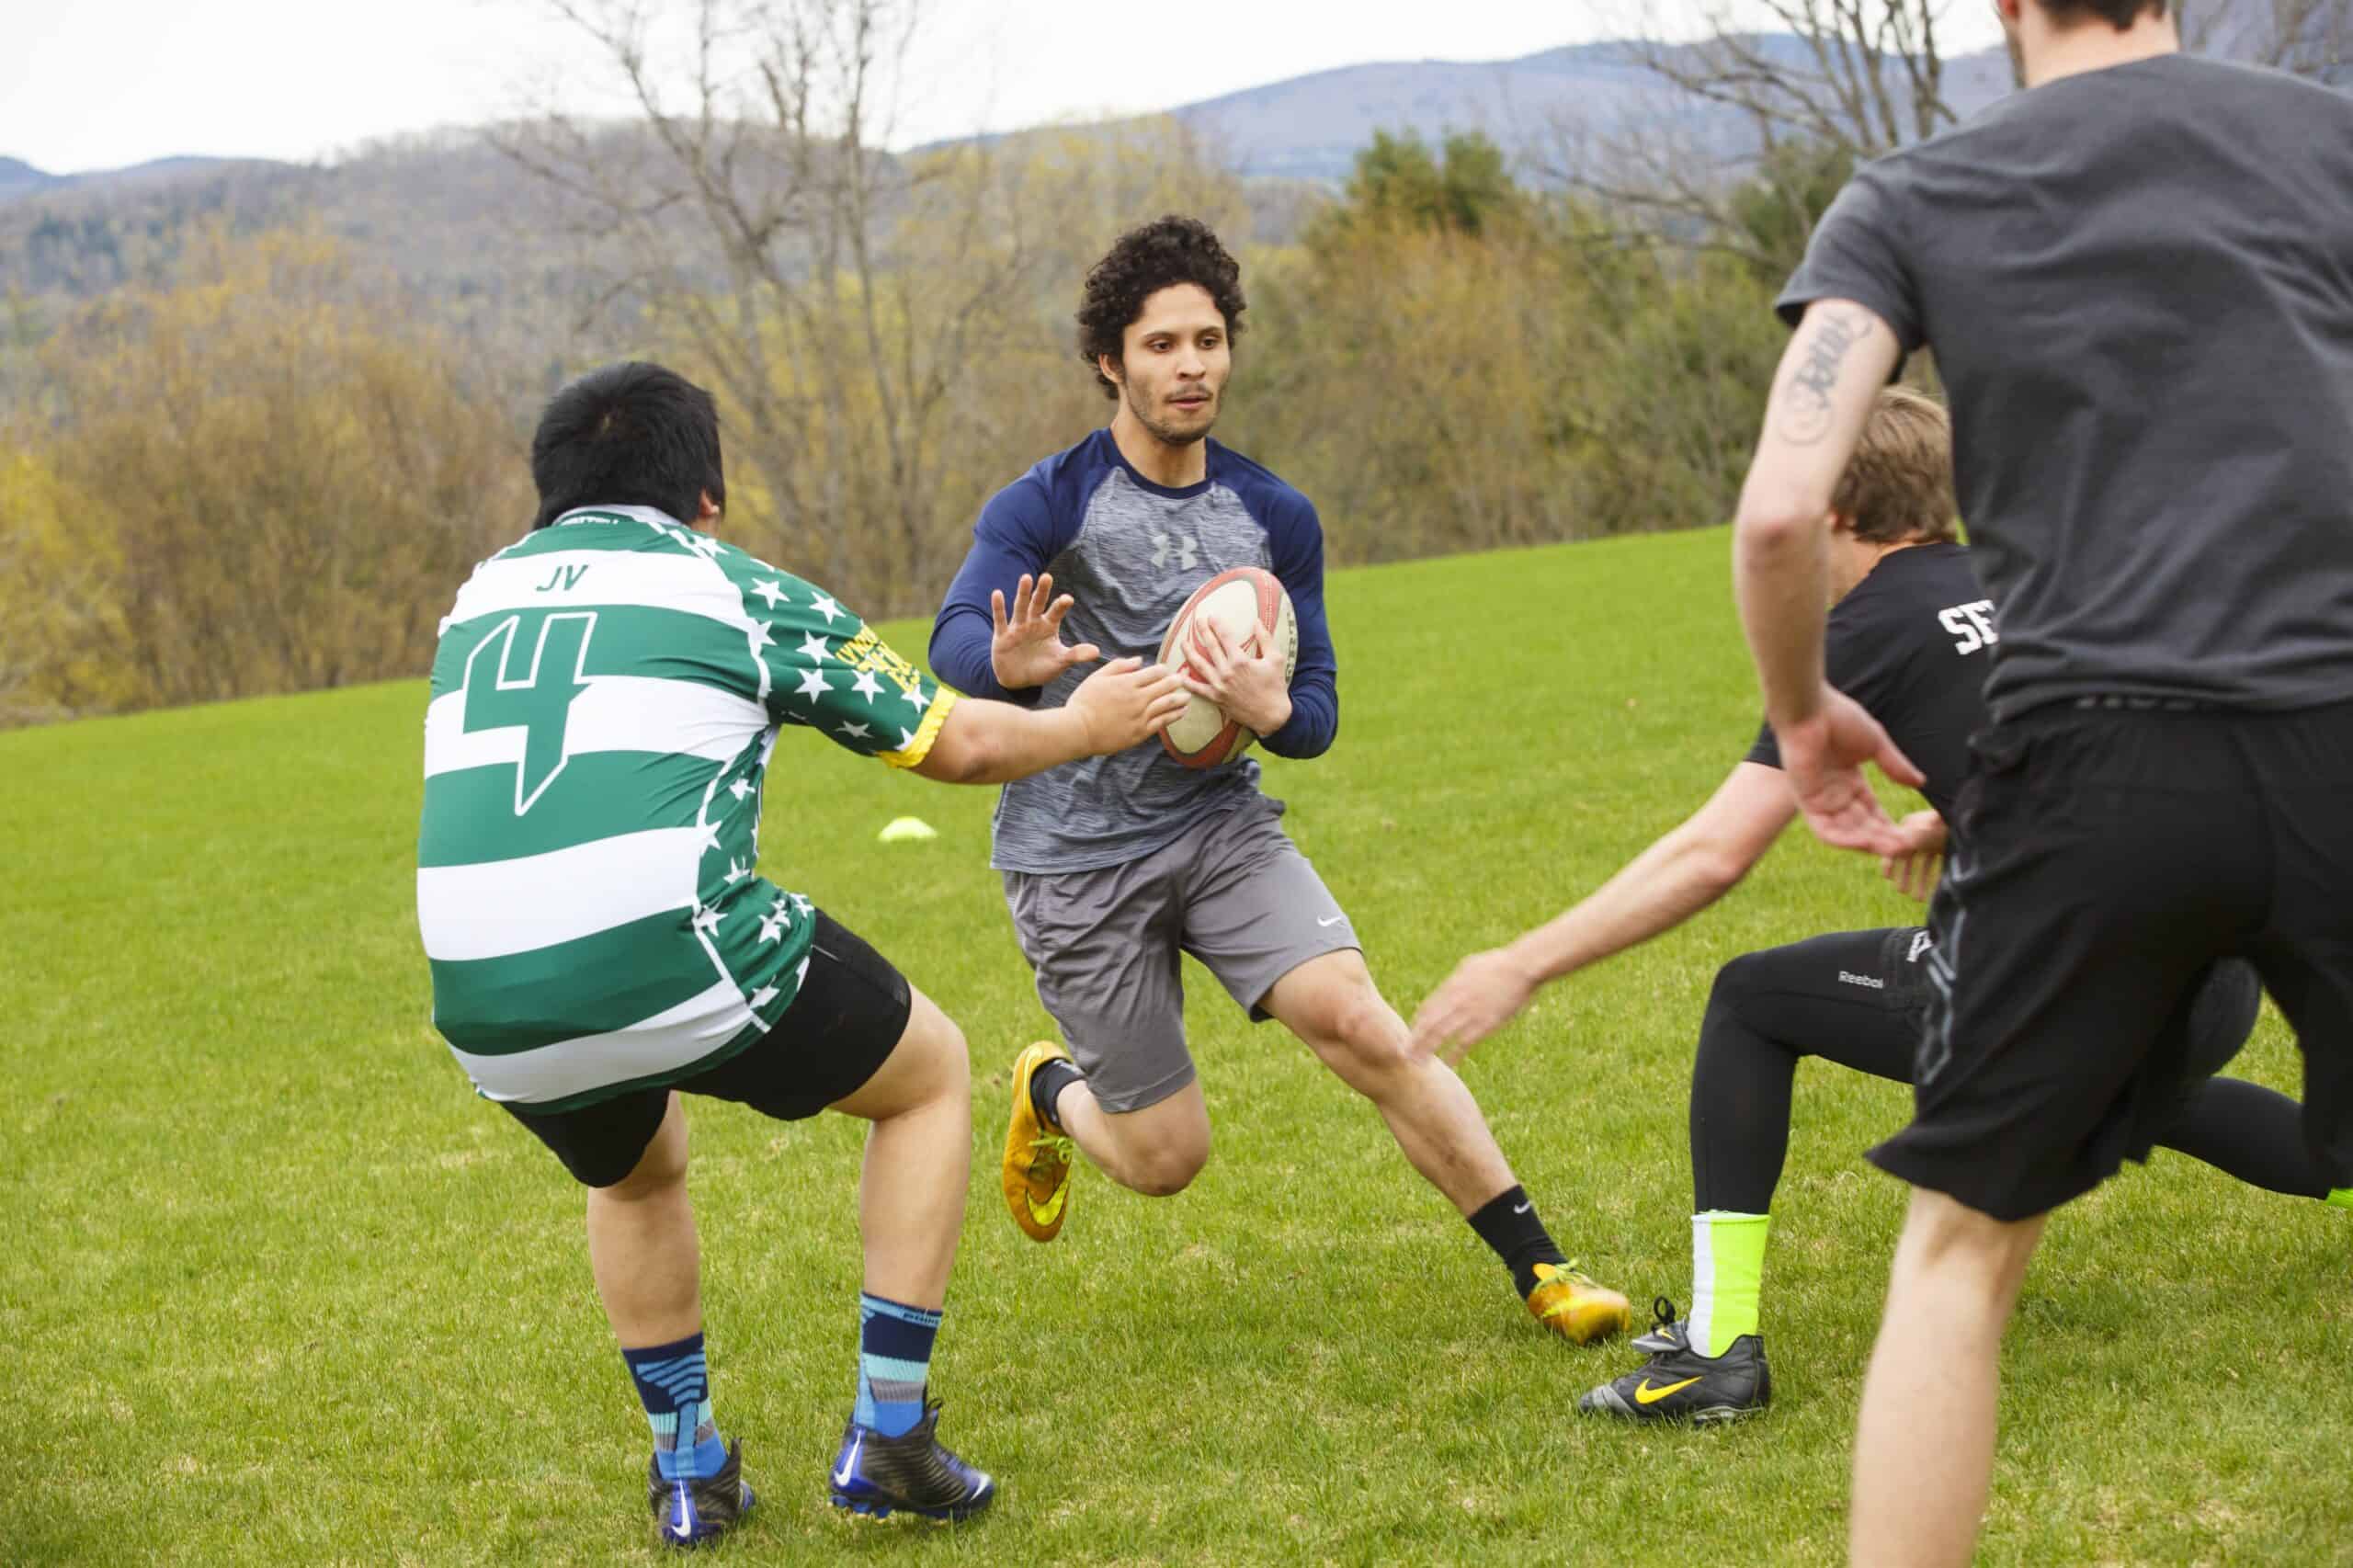 A young dark haired man holding a rugby ball runs towards a group of other men trying to stop him.